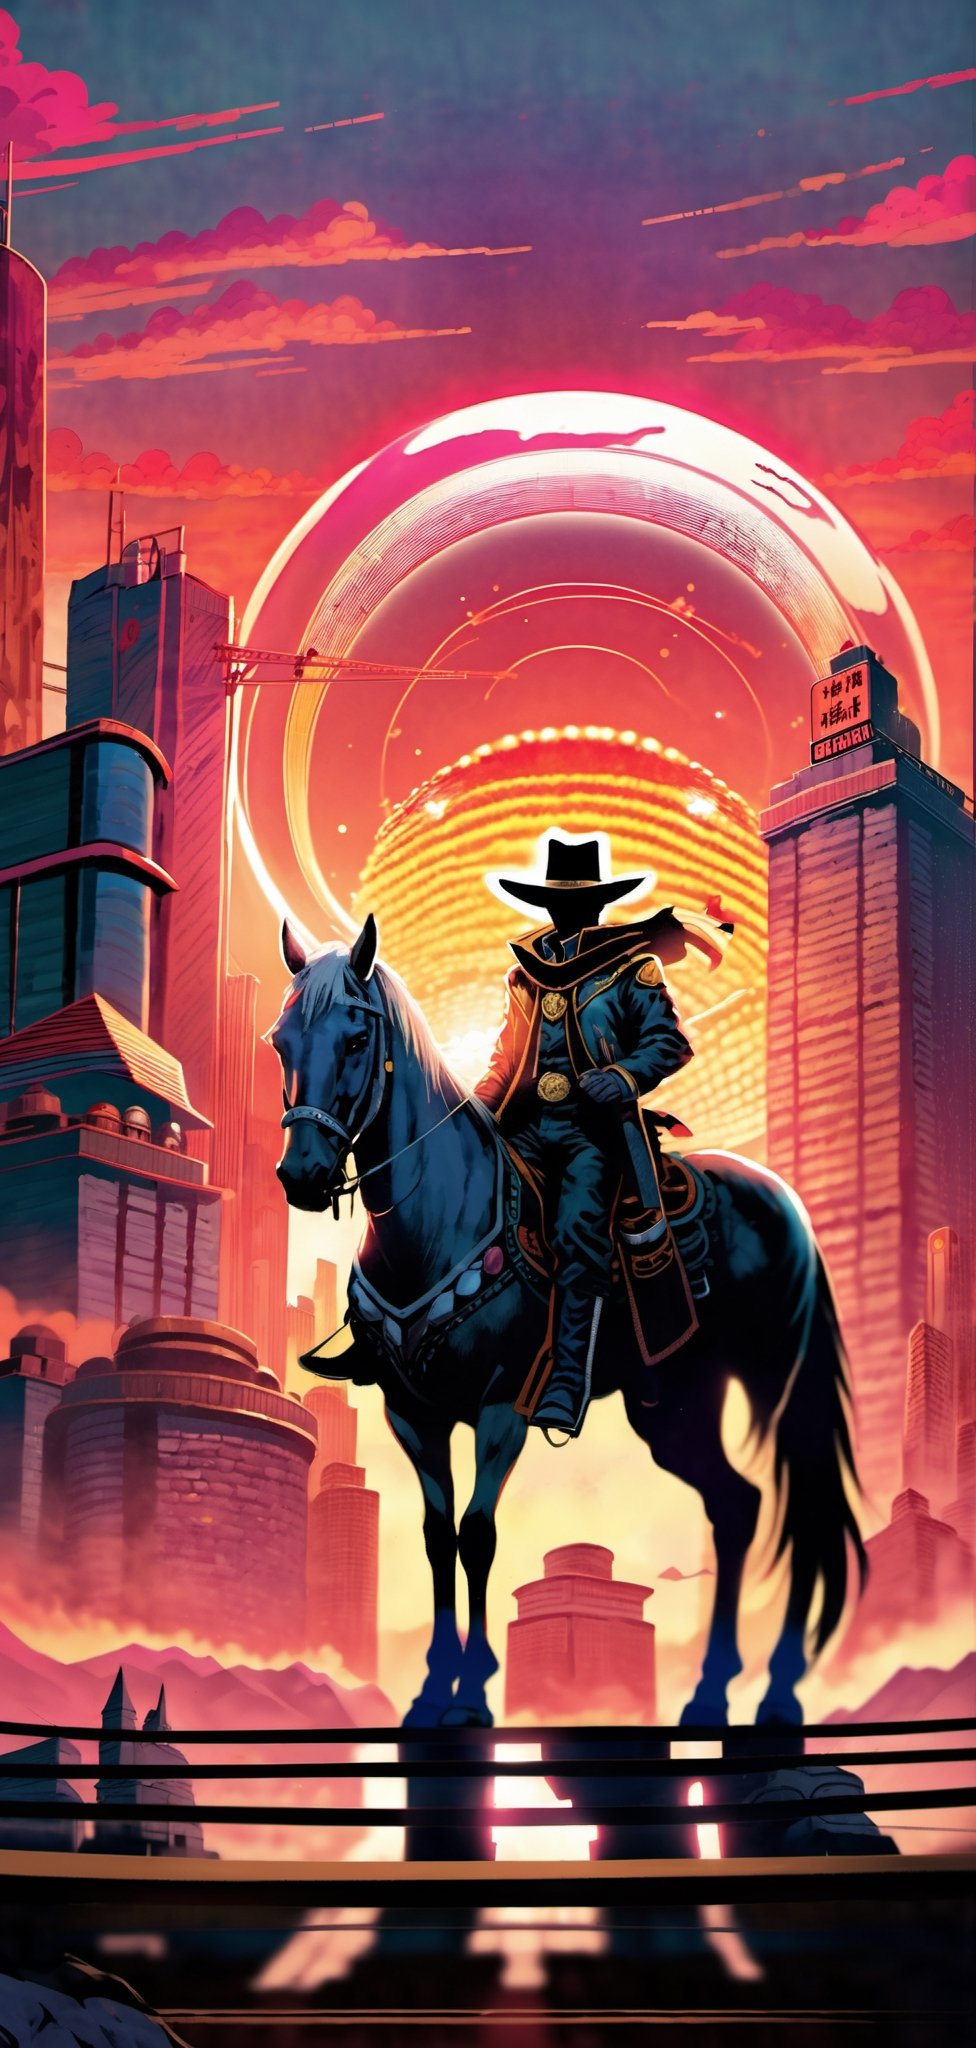 Transport yourself to a magical atmosphere in a fantasy world with a prompt for an American western cowboy. Envision him at the age of 12 to 15 years old, wearing a cowboy hat,, and vibrant-colored clothing, set against the backdrop of a beautiful fantasy western world. Request a unique presentation of super realistic images in 32K Ultra HD, capturing every detail in a photographic cinematic style – a masterpiece that immerses viewers in the enchanting realm. he is a boy 10 years old,mecha musume,robot,veronica,SAM YANG,cartoon,JessicaWaifu,Hajime_Saitou,zhongfenghua,comic_book_cover,ninjascroll,IncursioThrowingAFatRat,ASU1,KanekiMeme,PixelArt,comic_book_panels,monochrome,kujo jotaro,sketch,vash the stampede,MONOCHROME GLOWING,cyberpunk style,cyberpunk